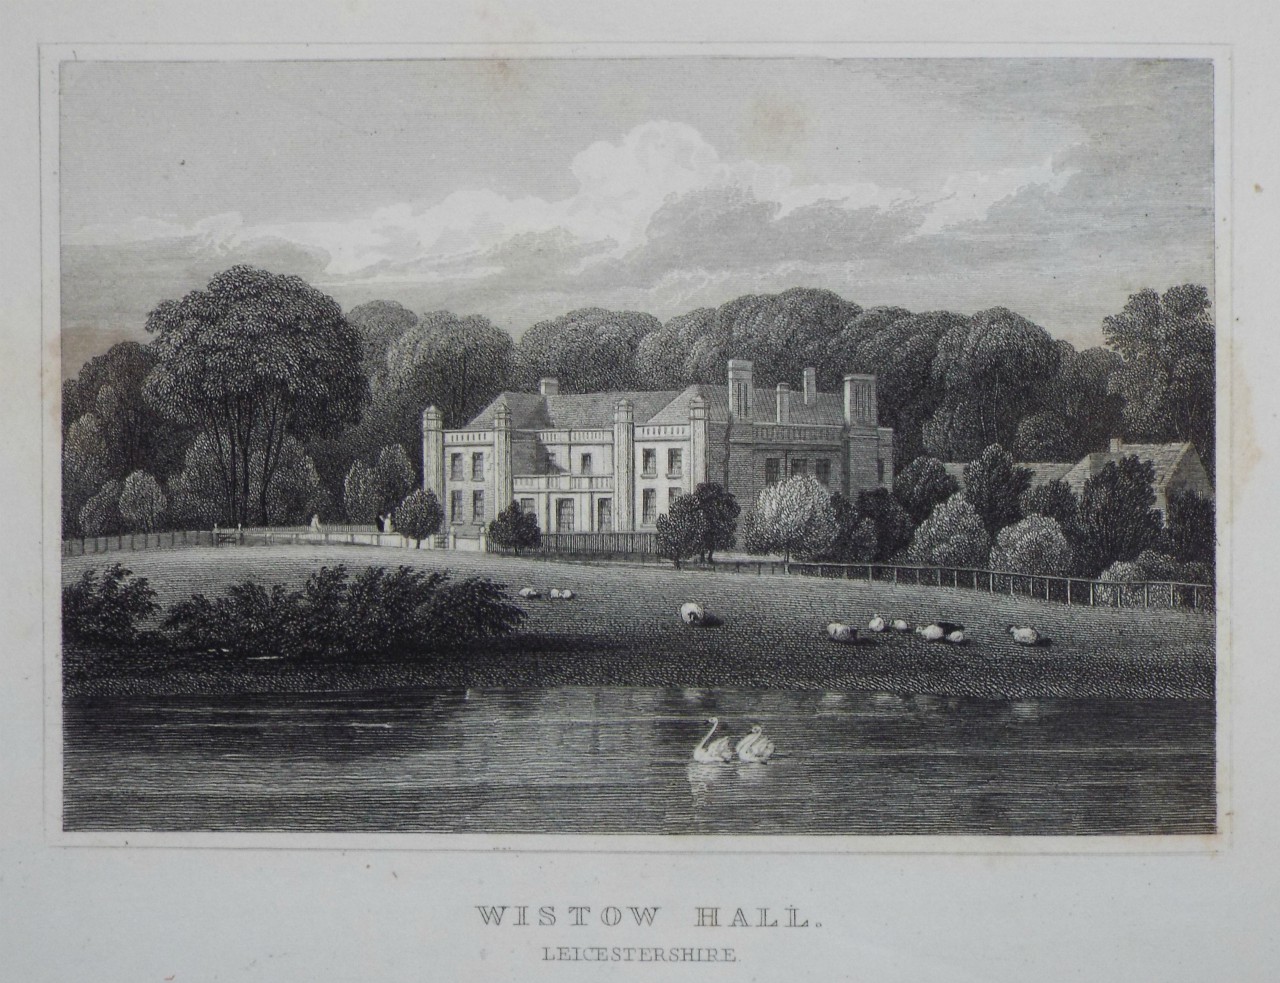 Print - Wistow Hall, Leicestershire. - Radclyffe